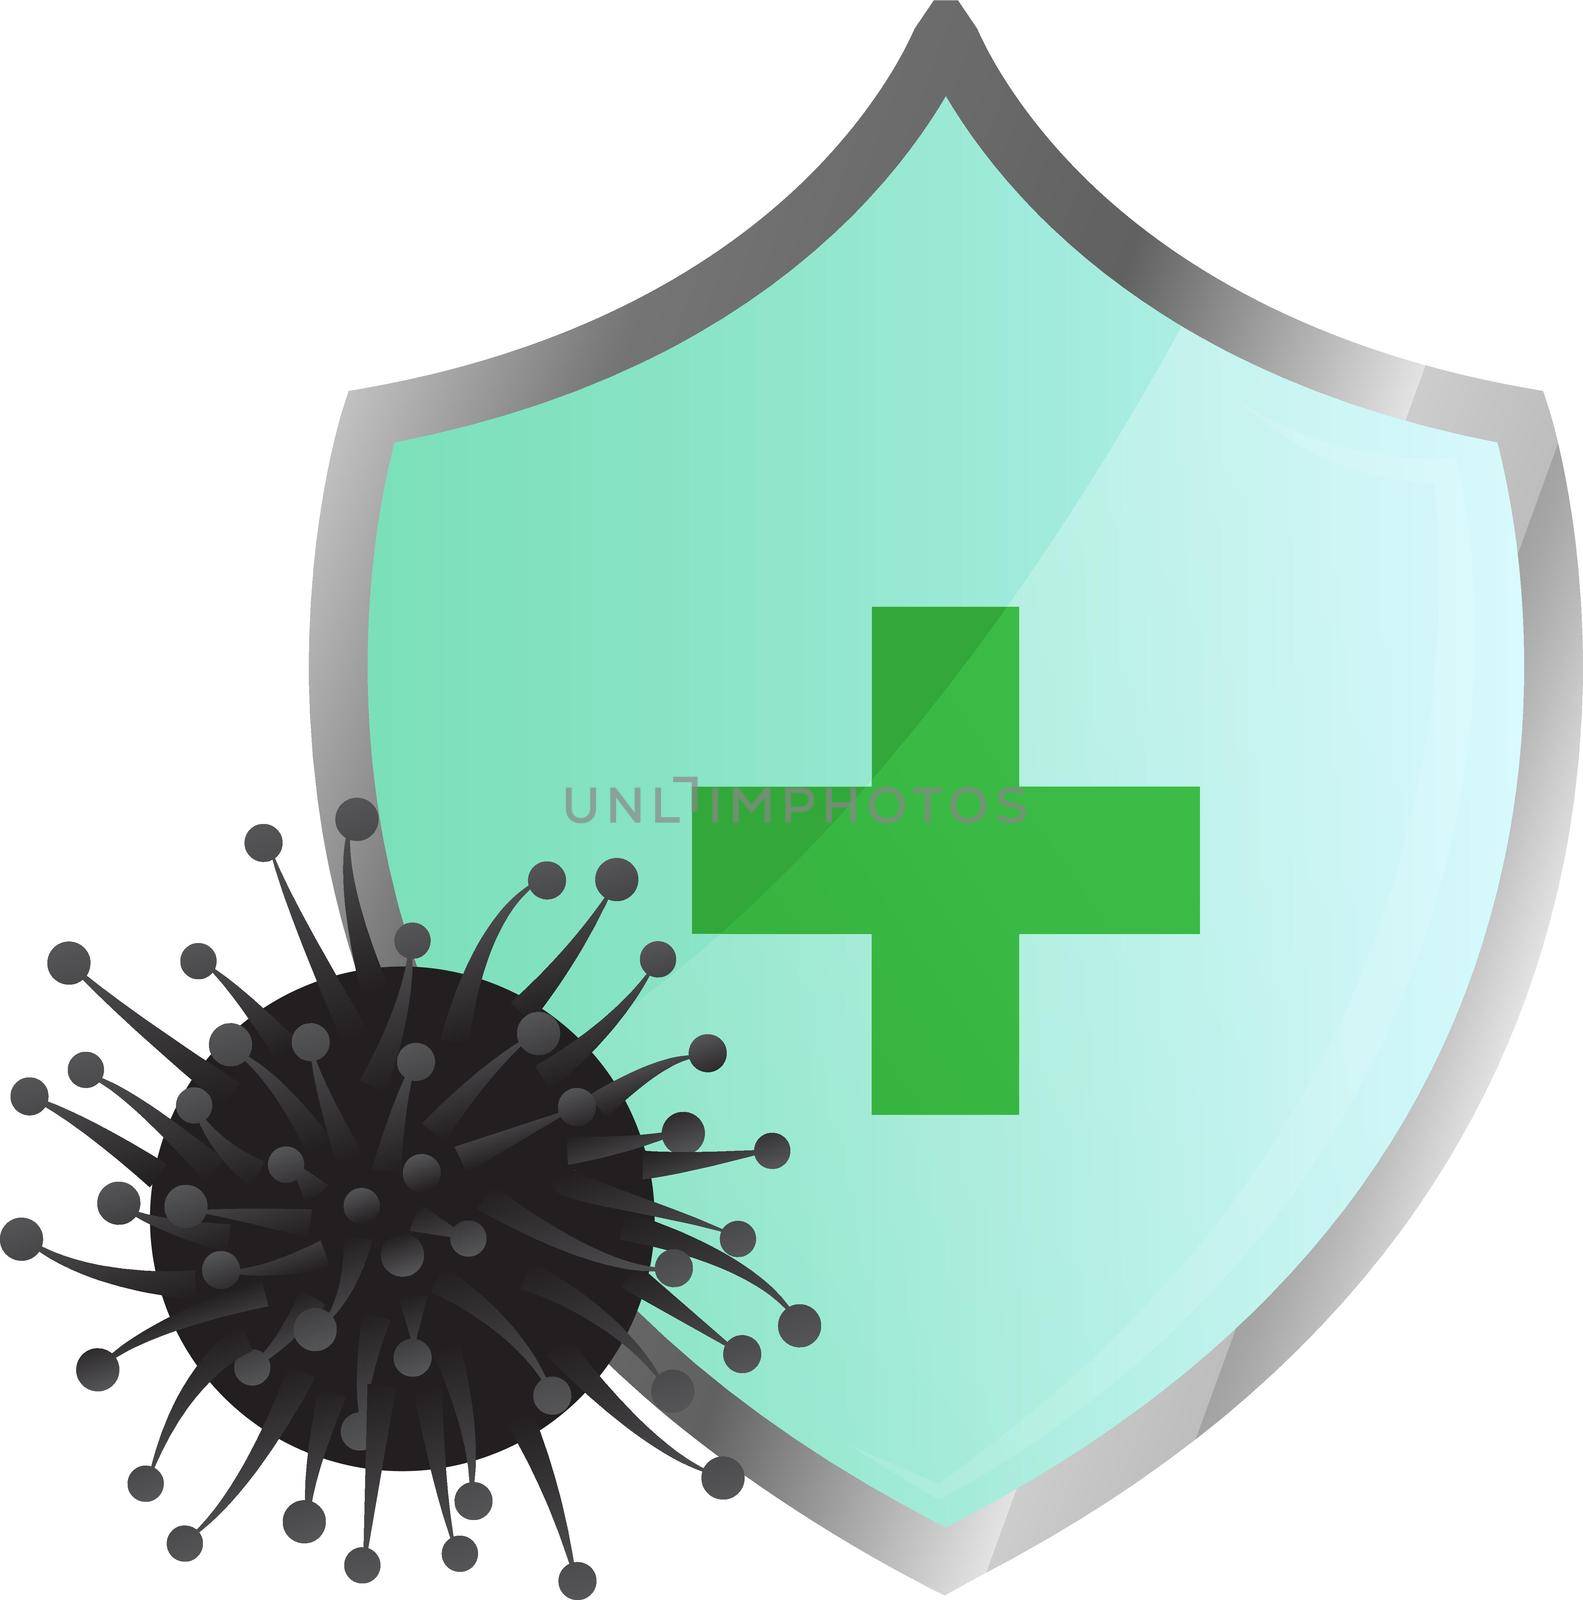 Antivirus shield sign vector illustration on a white background by Olena758